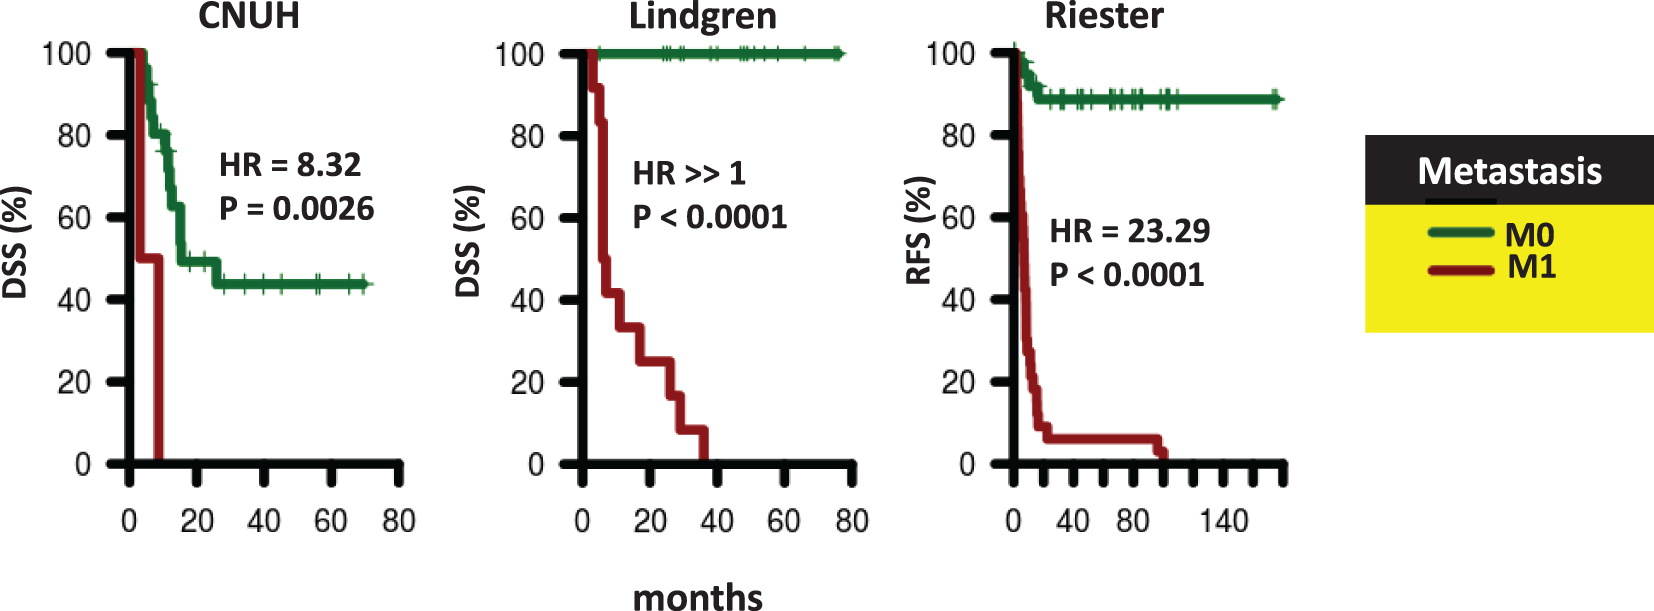 
          Survival of patients according to presence of distant metastases. Kaplan-Meier curves were generated for patients with M0 (green) and M1 (red) tumors in CNUH (N = 28), and Lindgren (N = 32), and Riester (N = 78) cohorts. The hazard ratio (HR) for patients with M1 tumors compared to patients with M0 tumors and the corresponding log-rank P value is reported. Abbreviations: DSS, disease-specific survival; RFS, recurrence-free survival.
        